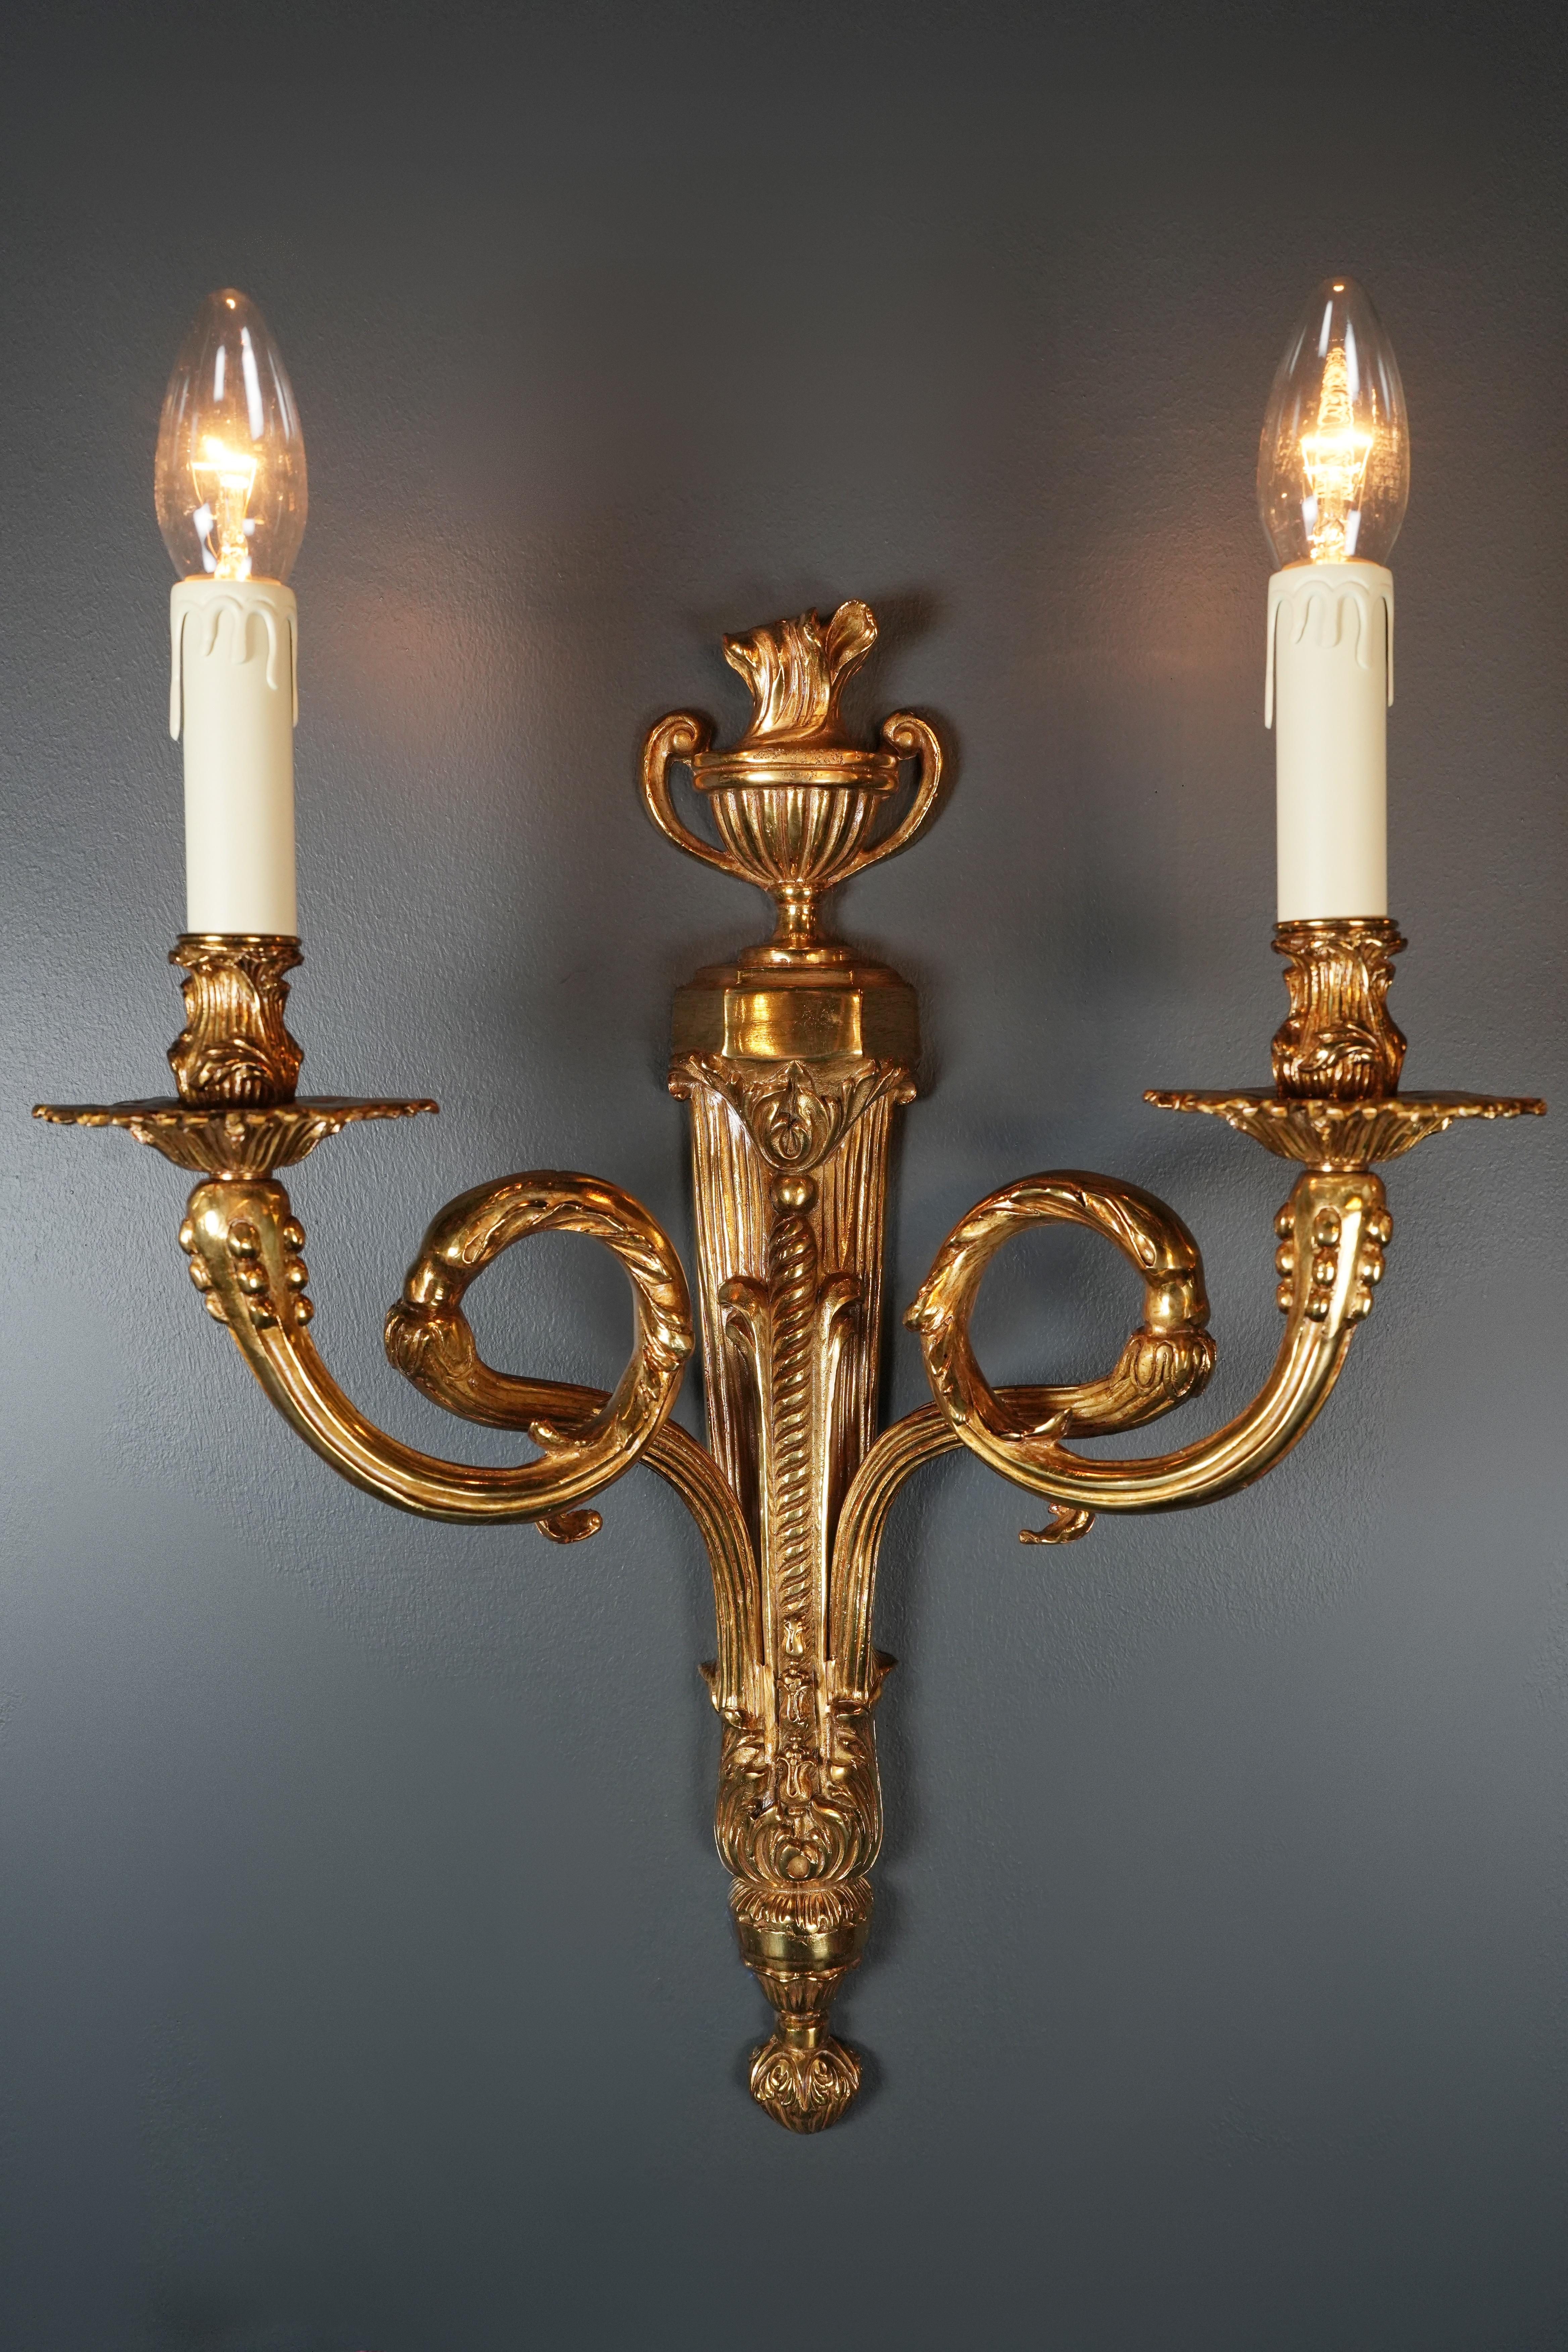 Immerse yourself in the elegance of bygone times with our exclusive antique-style brass wall lamp. This wall lamp is not only a stunning lighting object, but also a real work of art that brings the beauty of the ancient into the modern.

With a